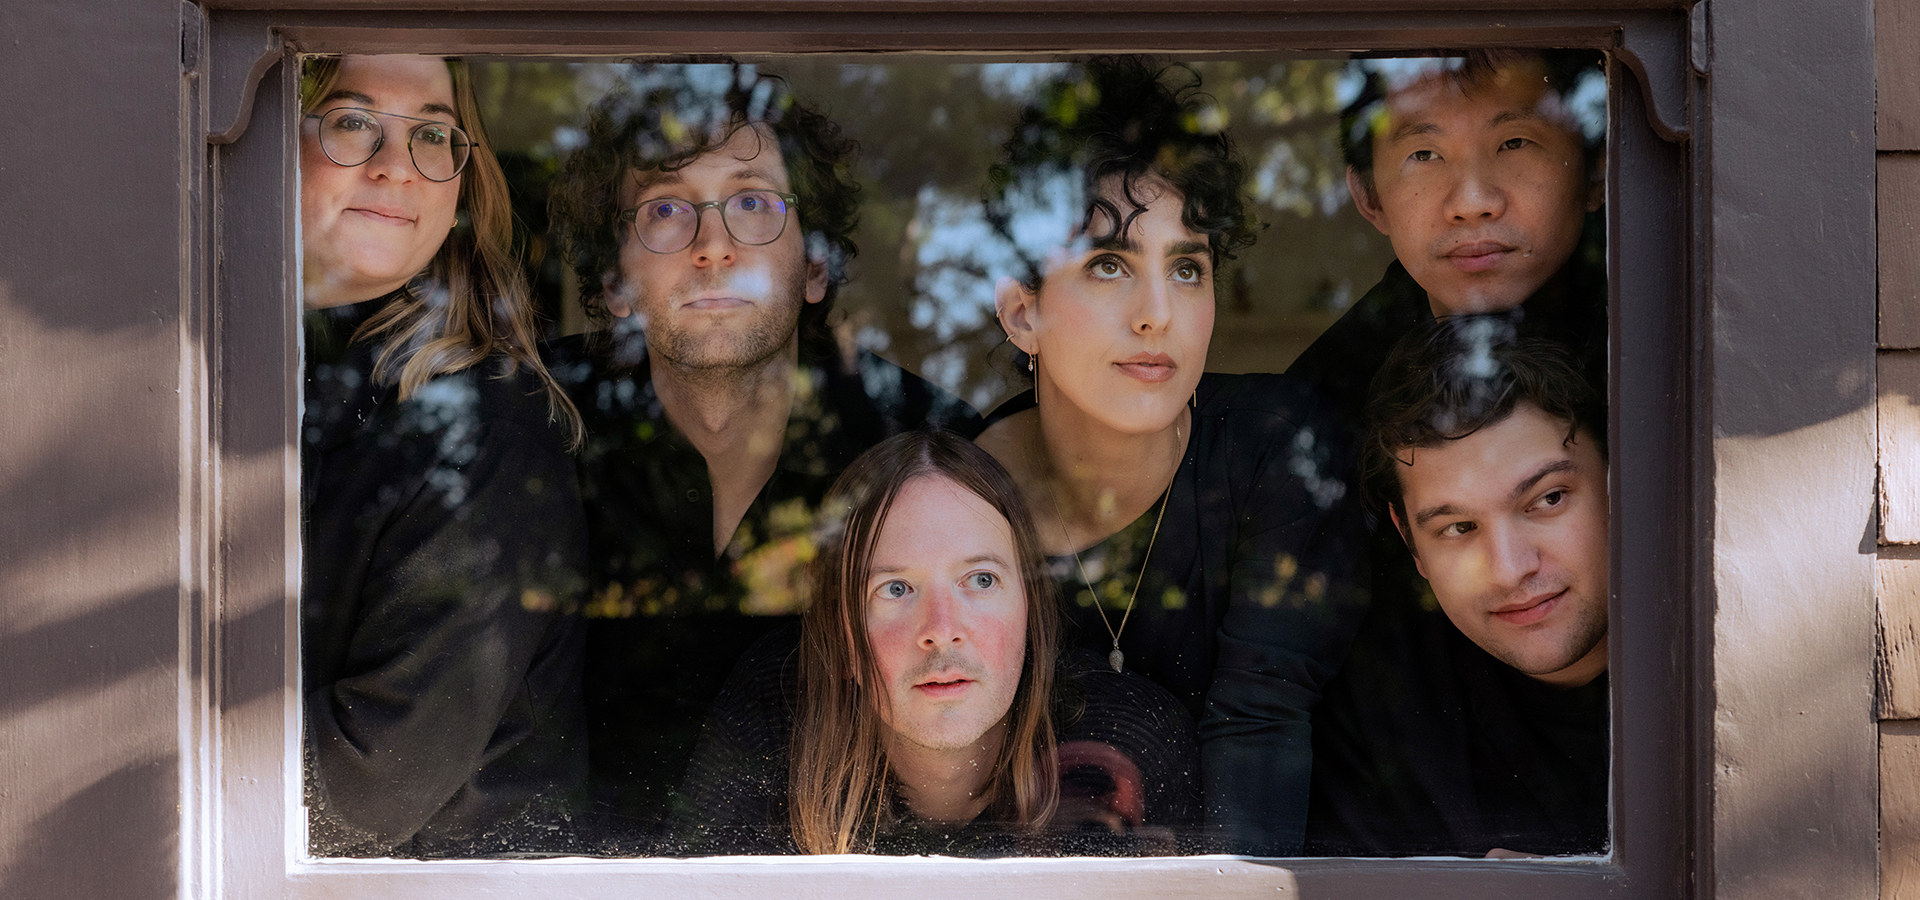 The yMusic Music Group members are arranged framed behind a small window, as they look ponderously through the glass toward the camera.